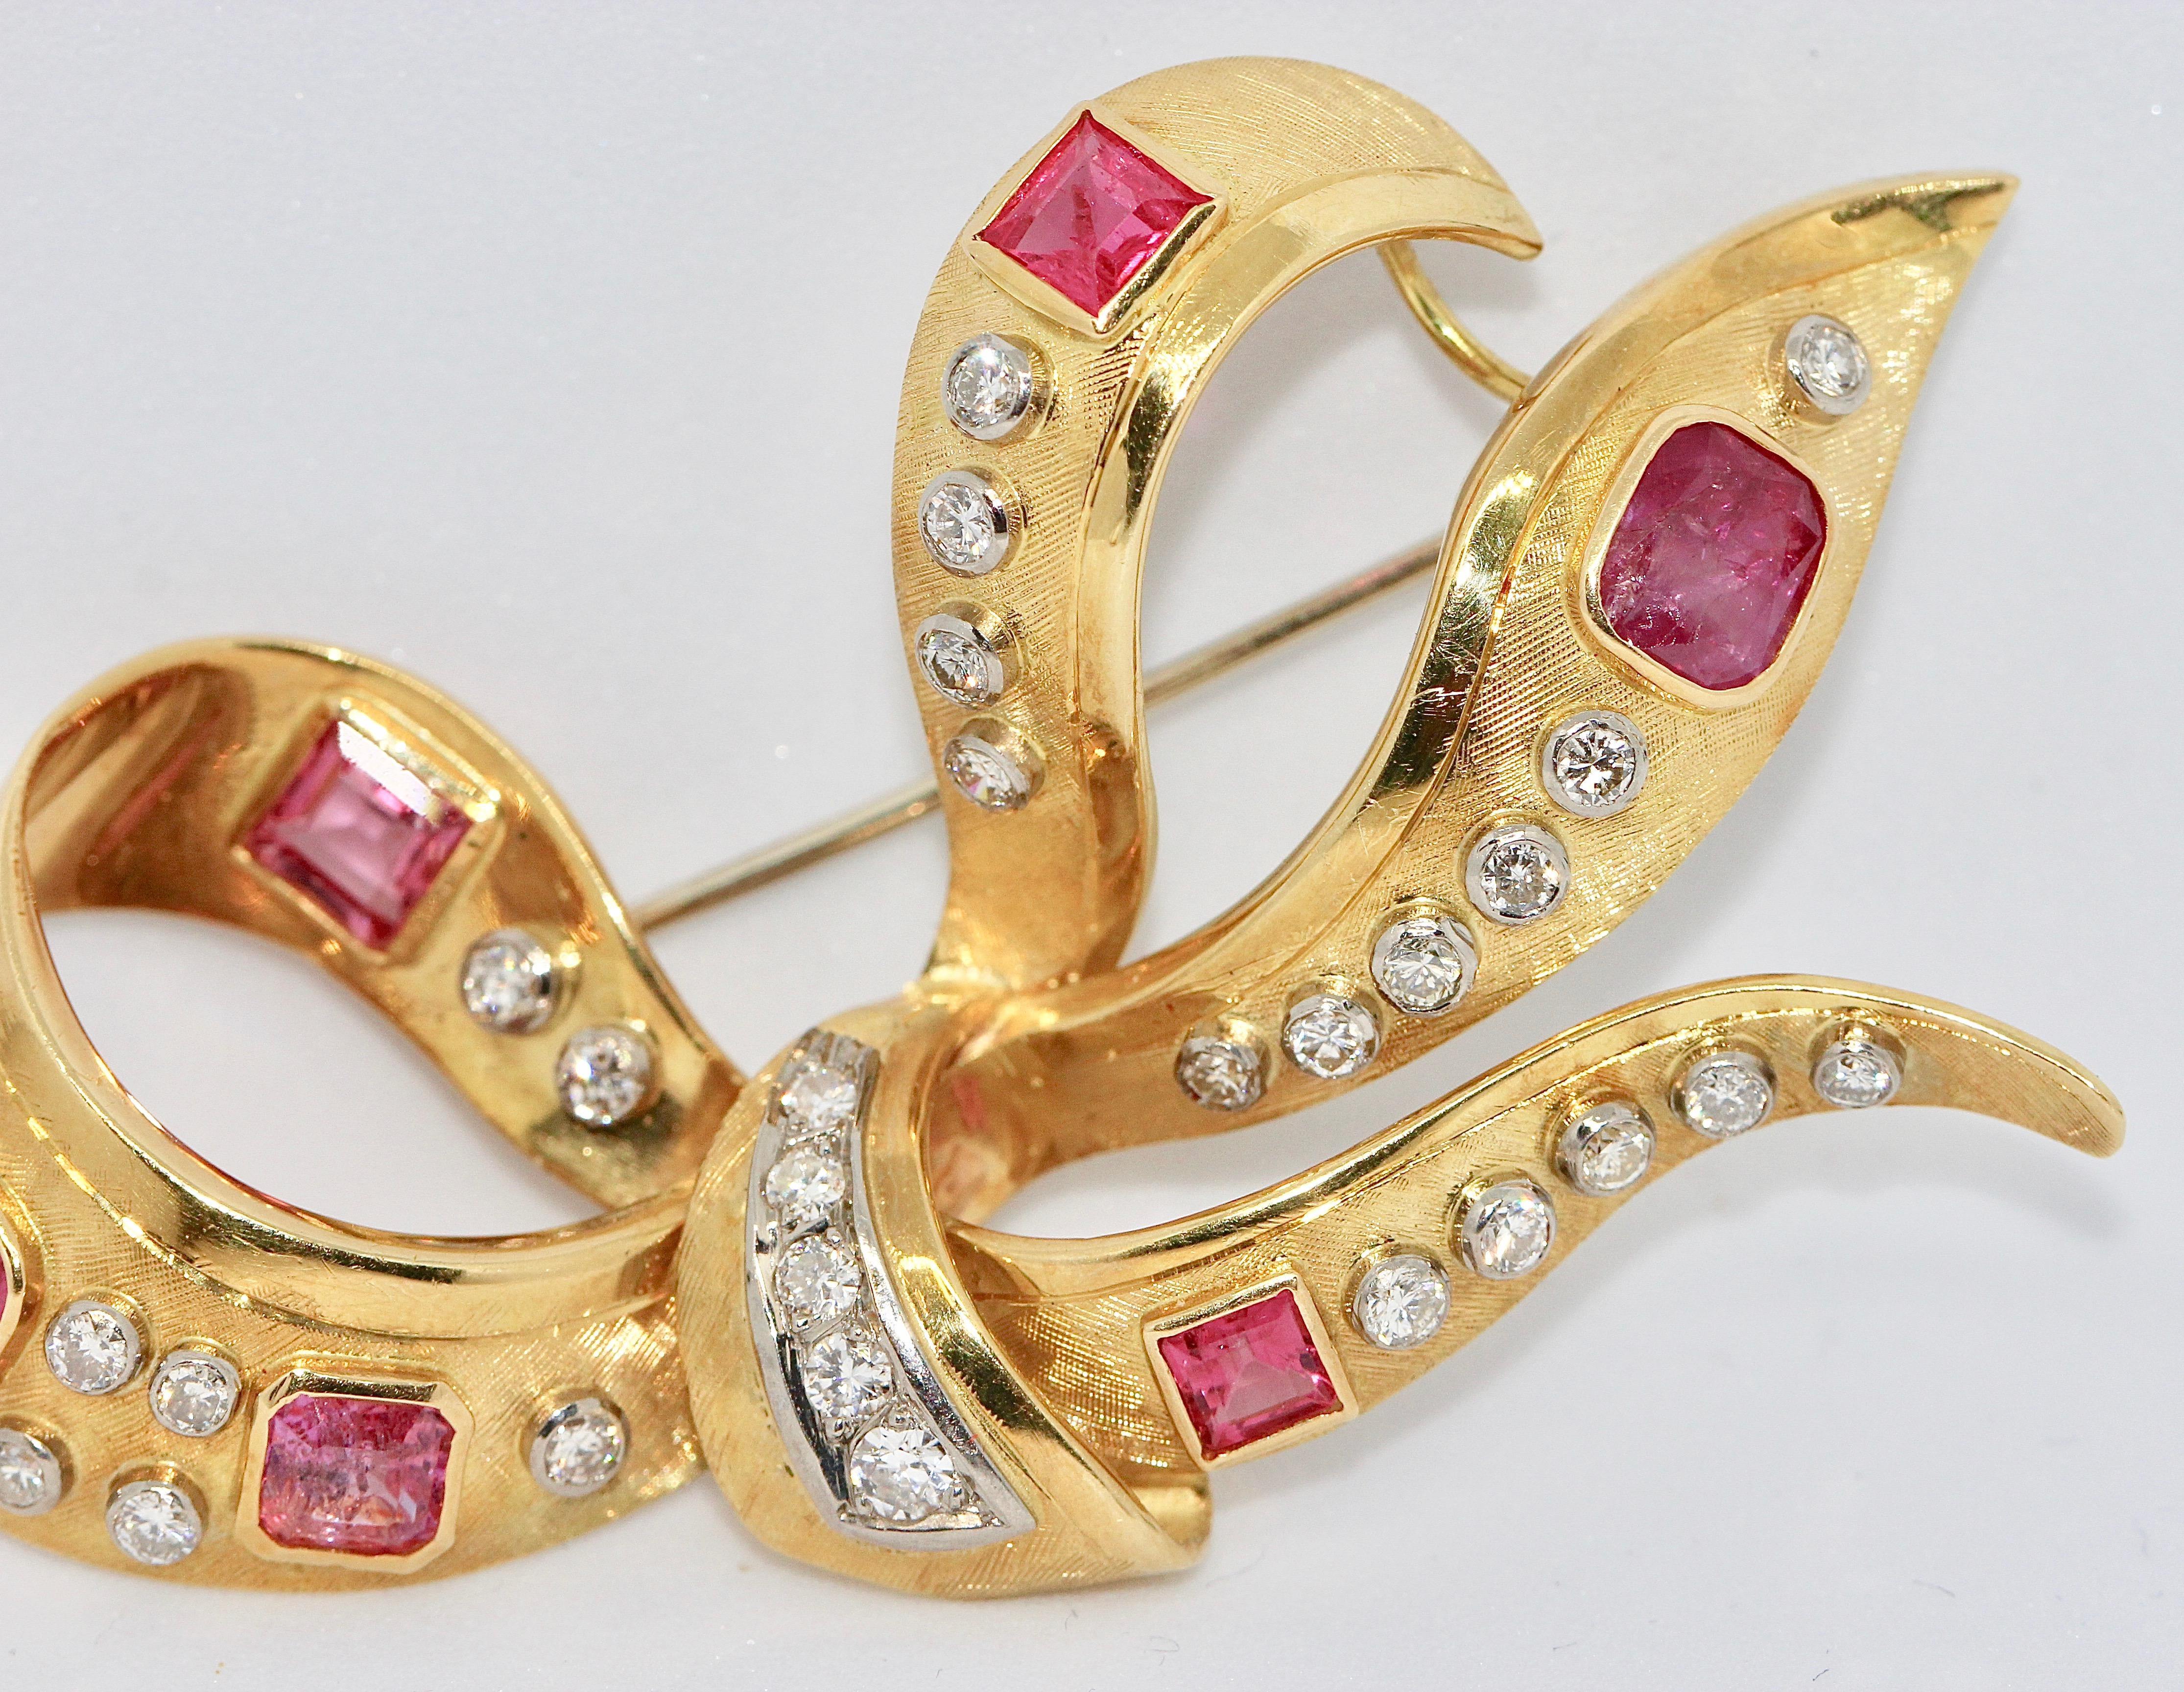 Large Elegant Gold Brooch in a Loop Shape 18 Karat Gold with Rubies and Diamonds In Good Condition For Sale In Berlin, DE